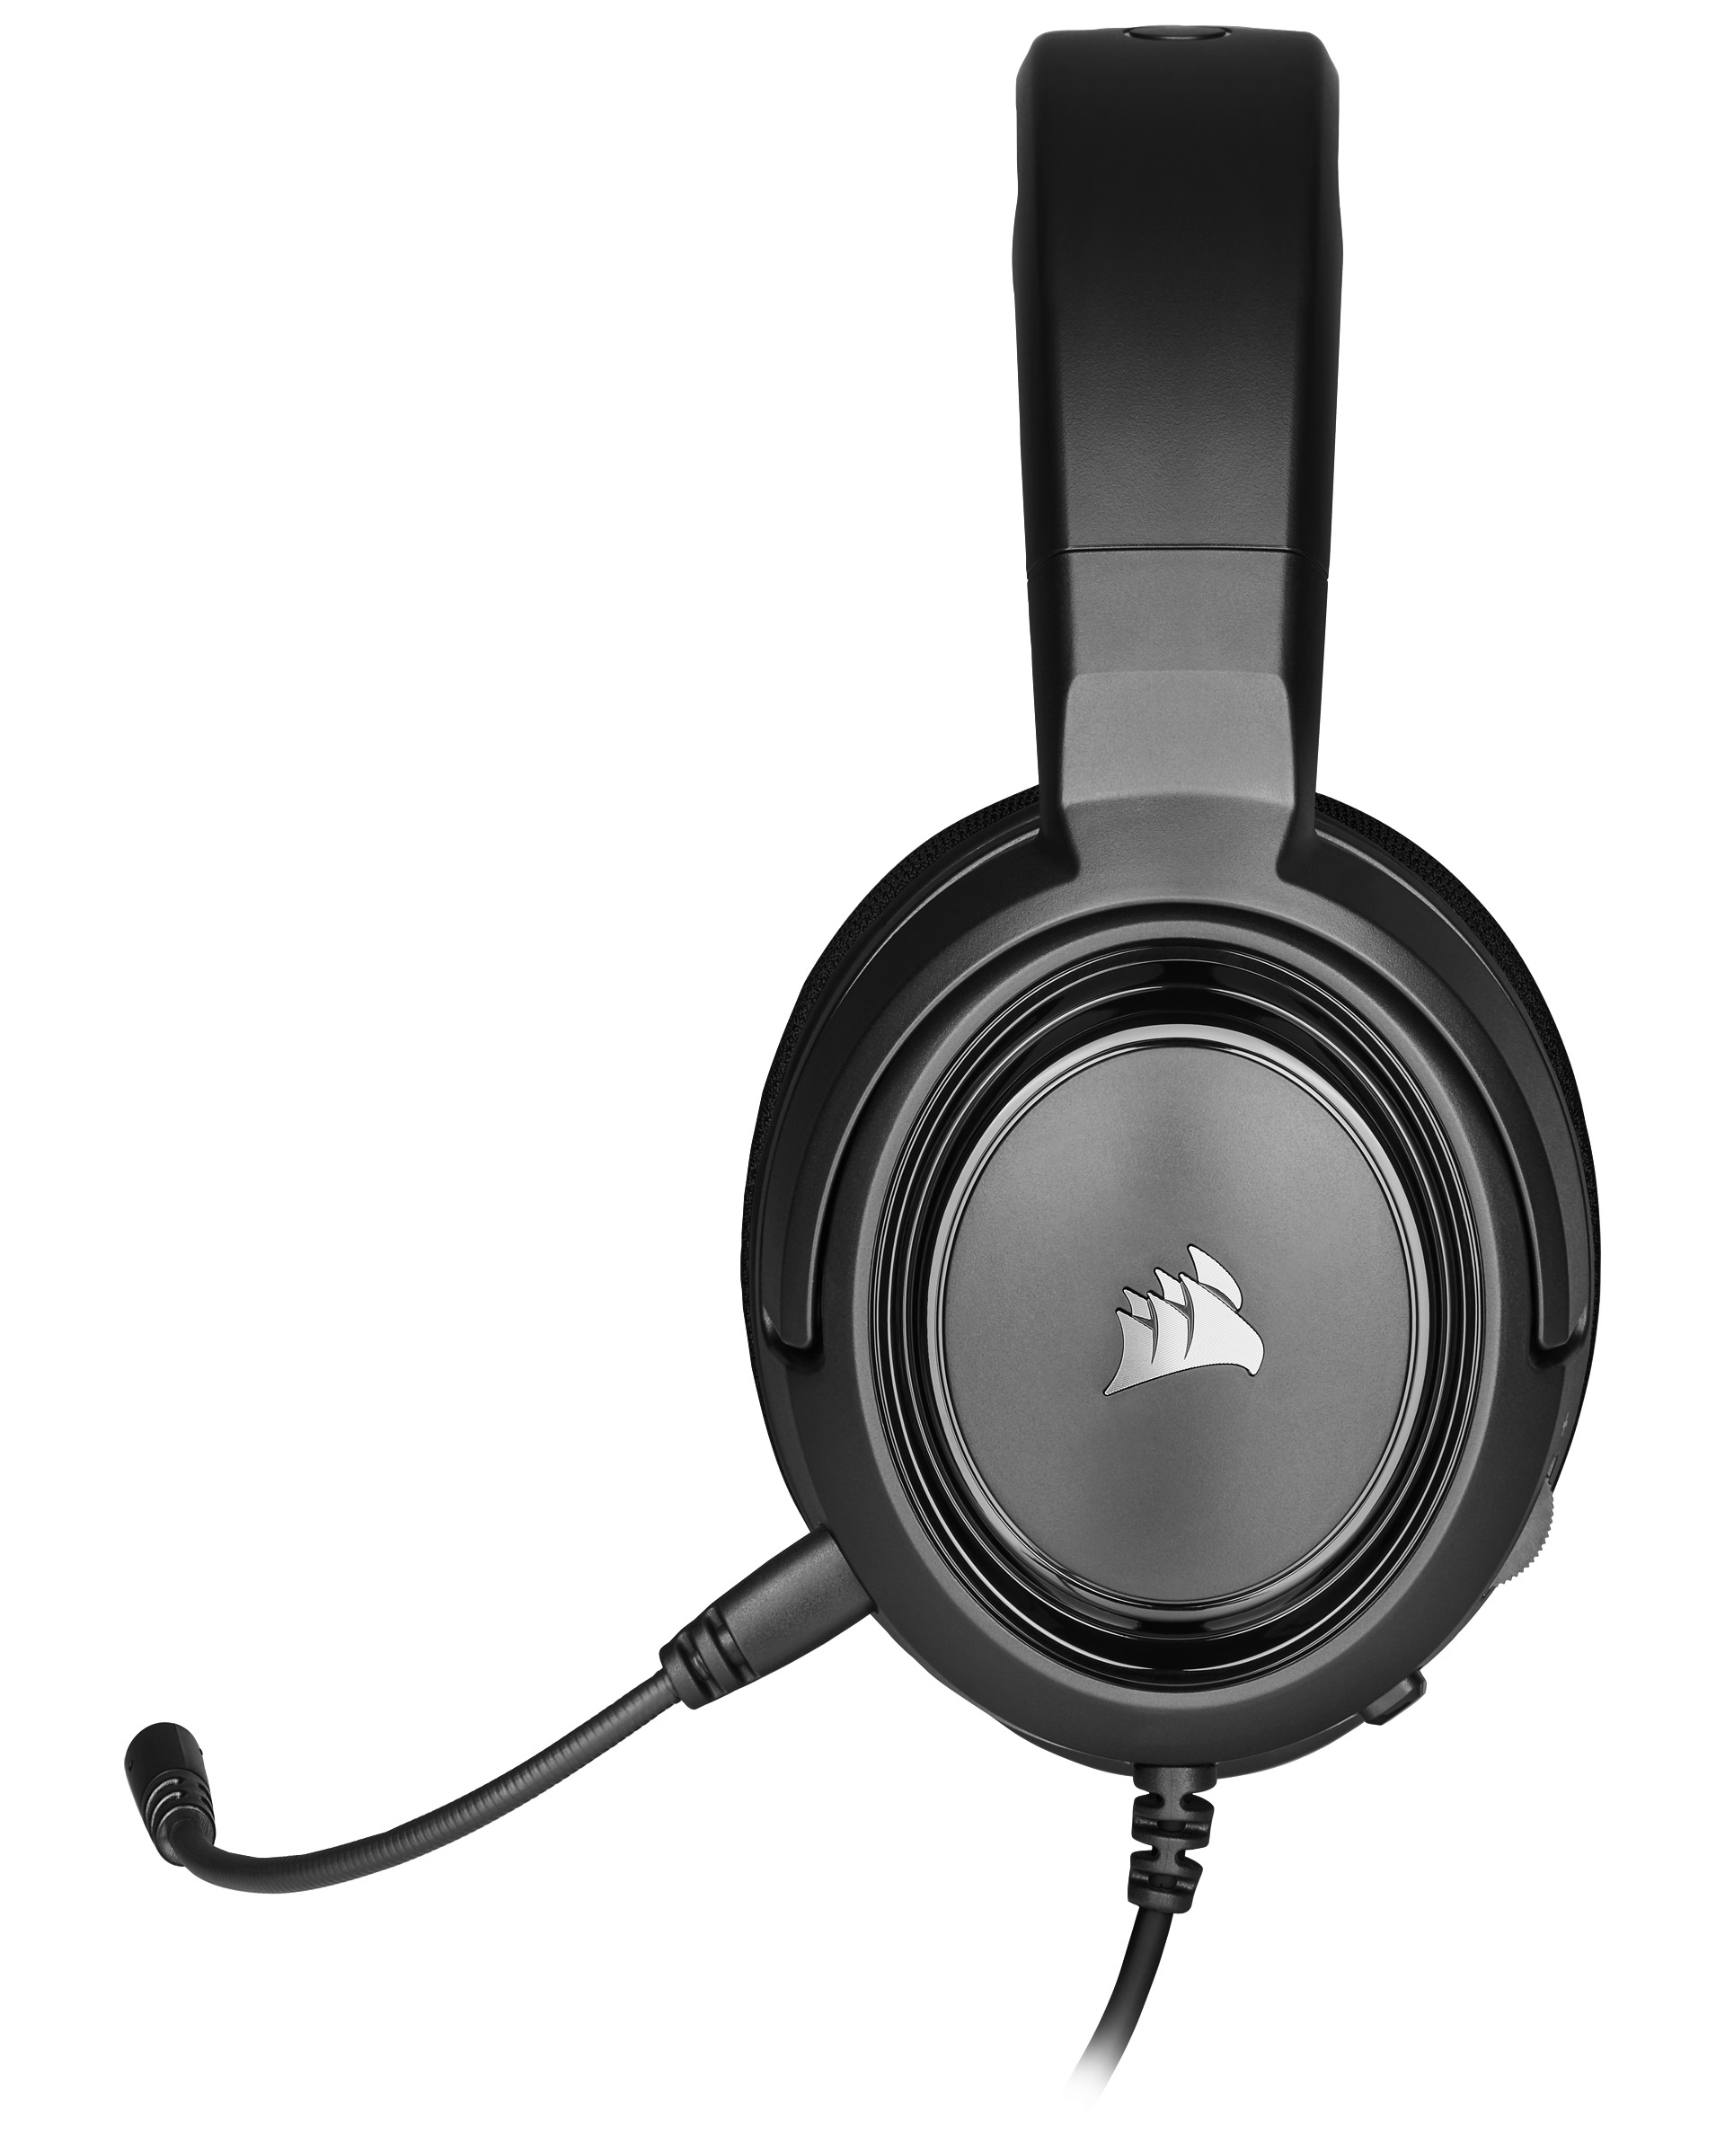 Over-ear Gaming Headset Carbon HS45, CORSAIR